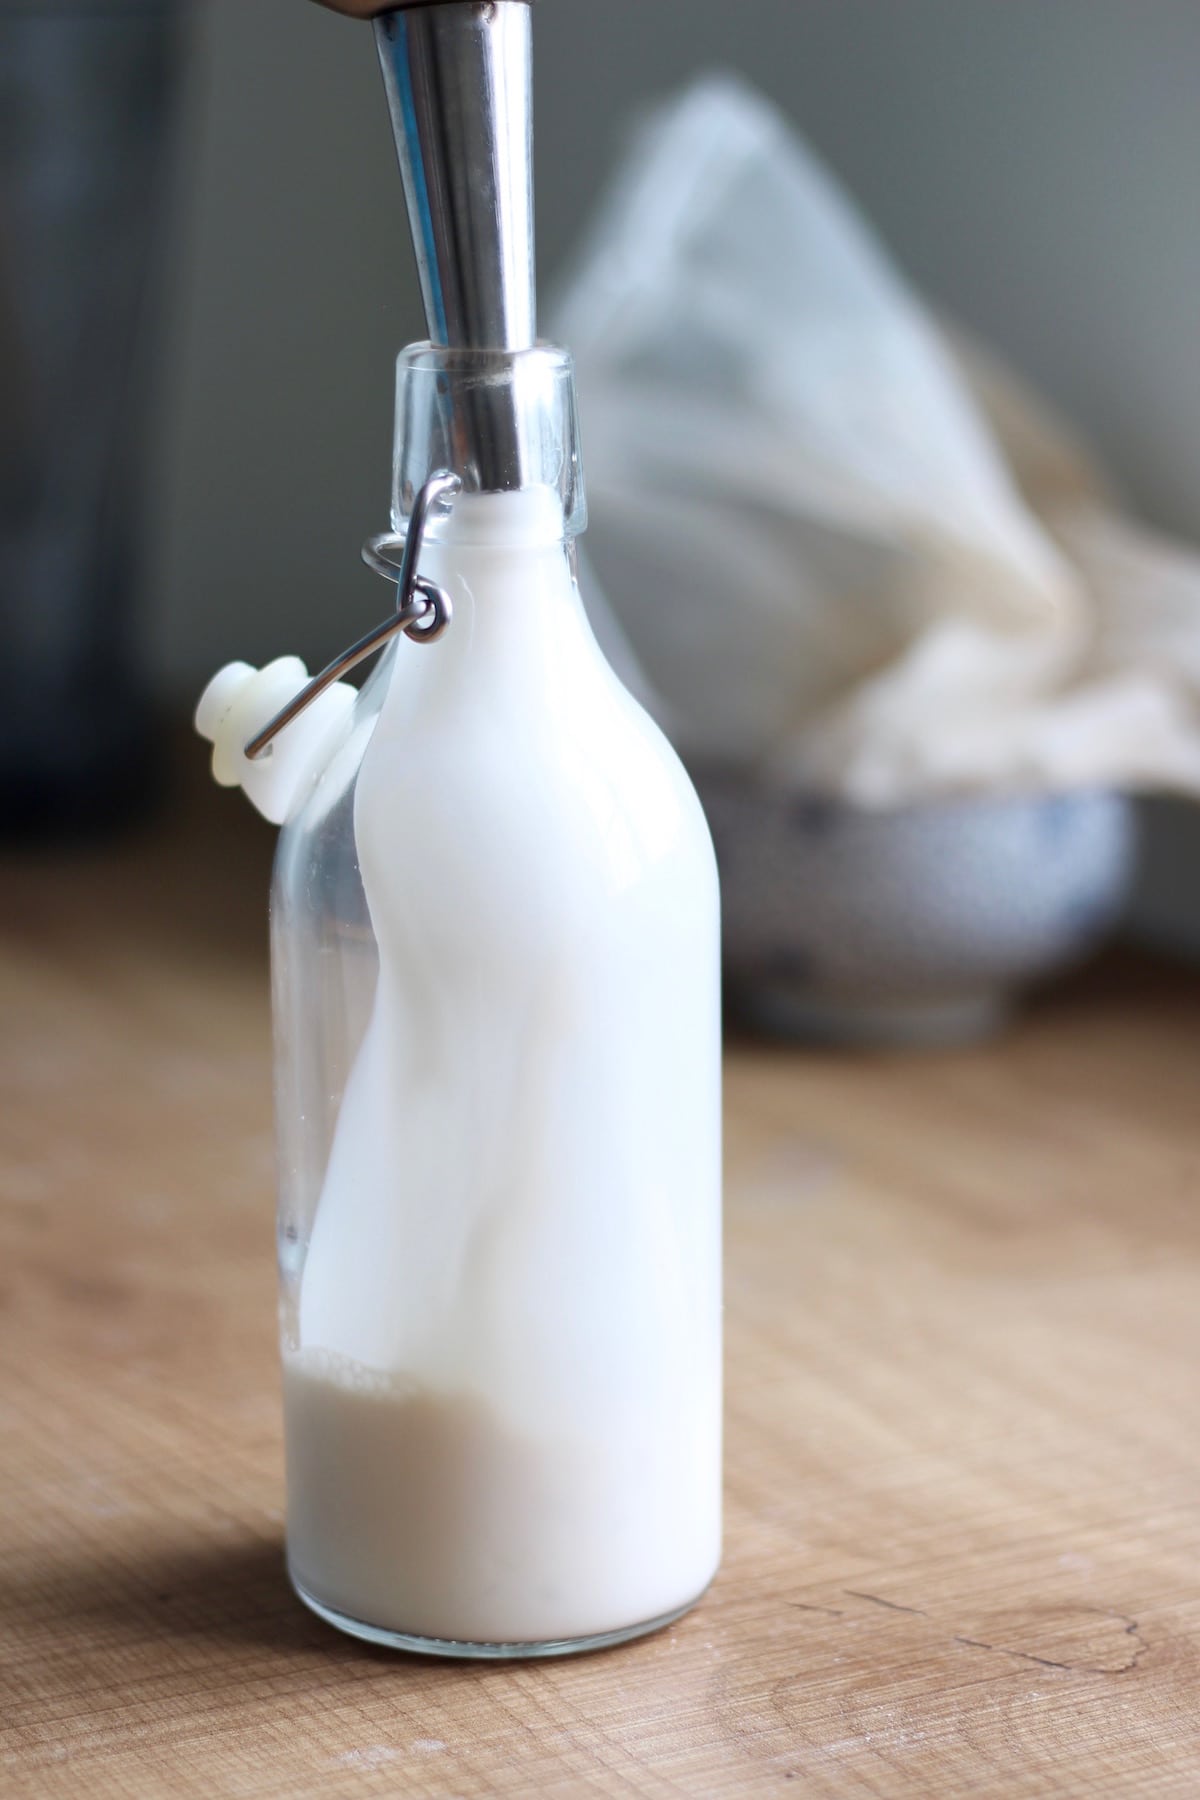 pouring freshly made almond milk into a glass jar